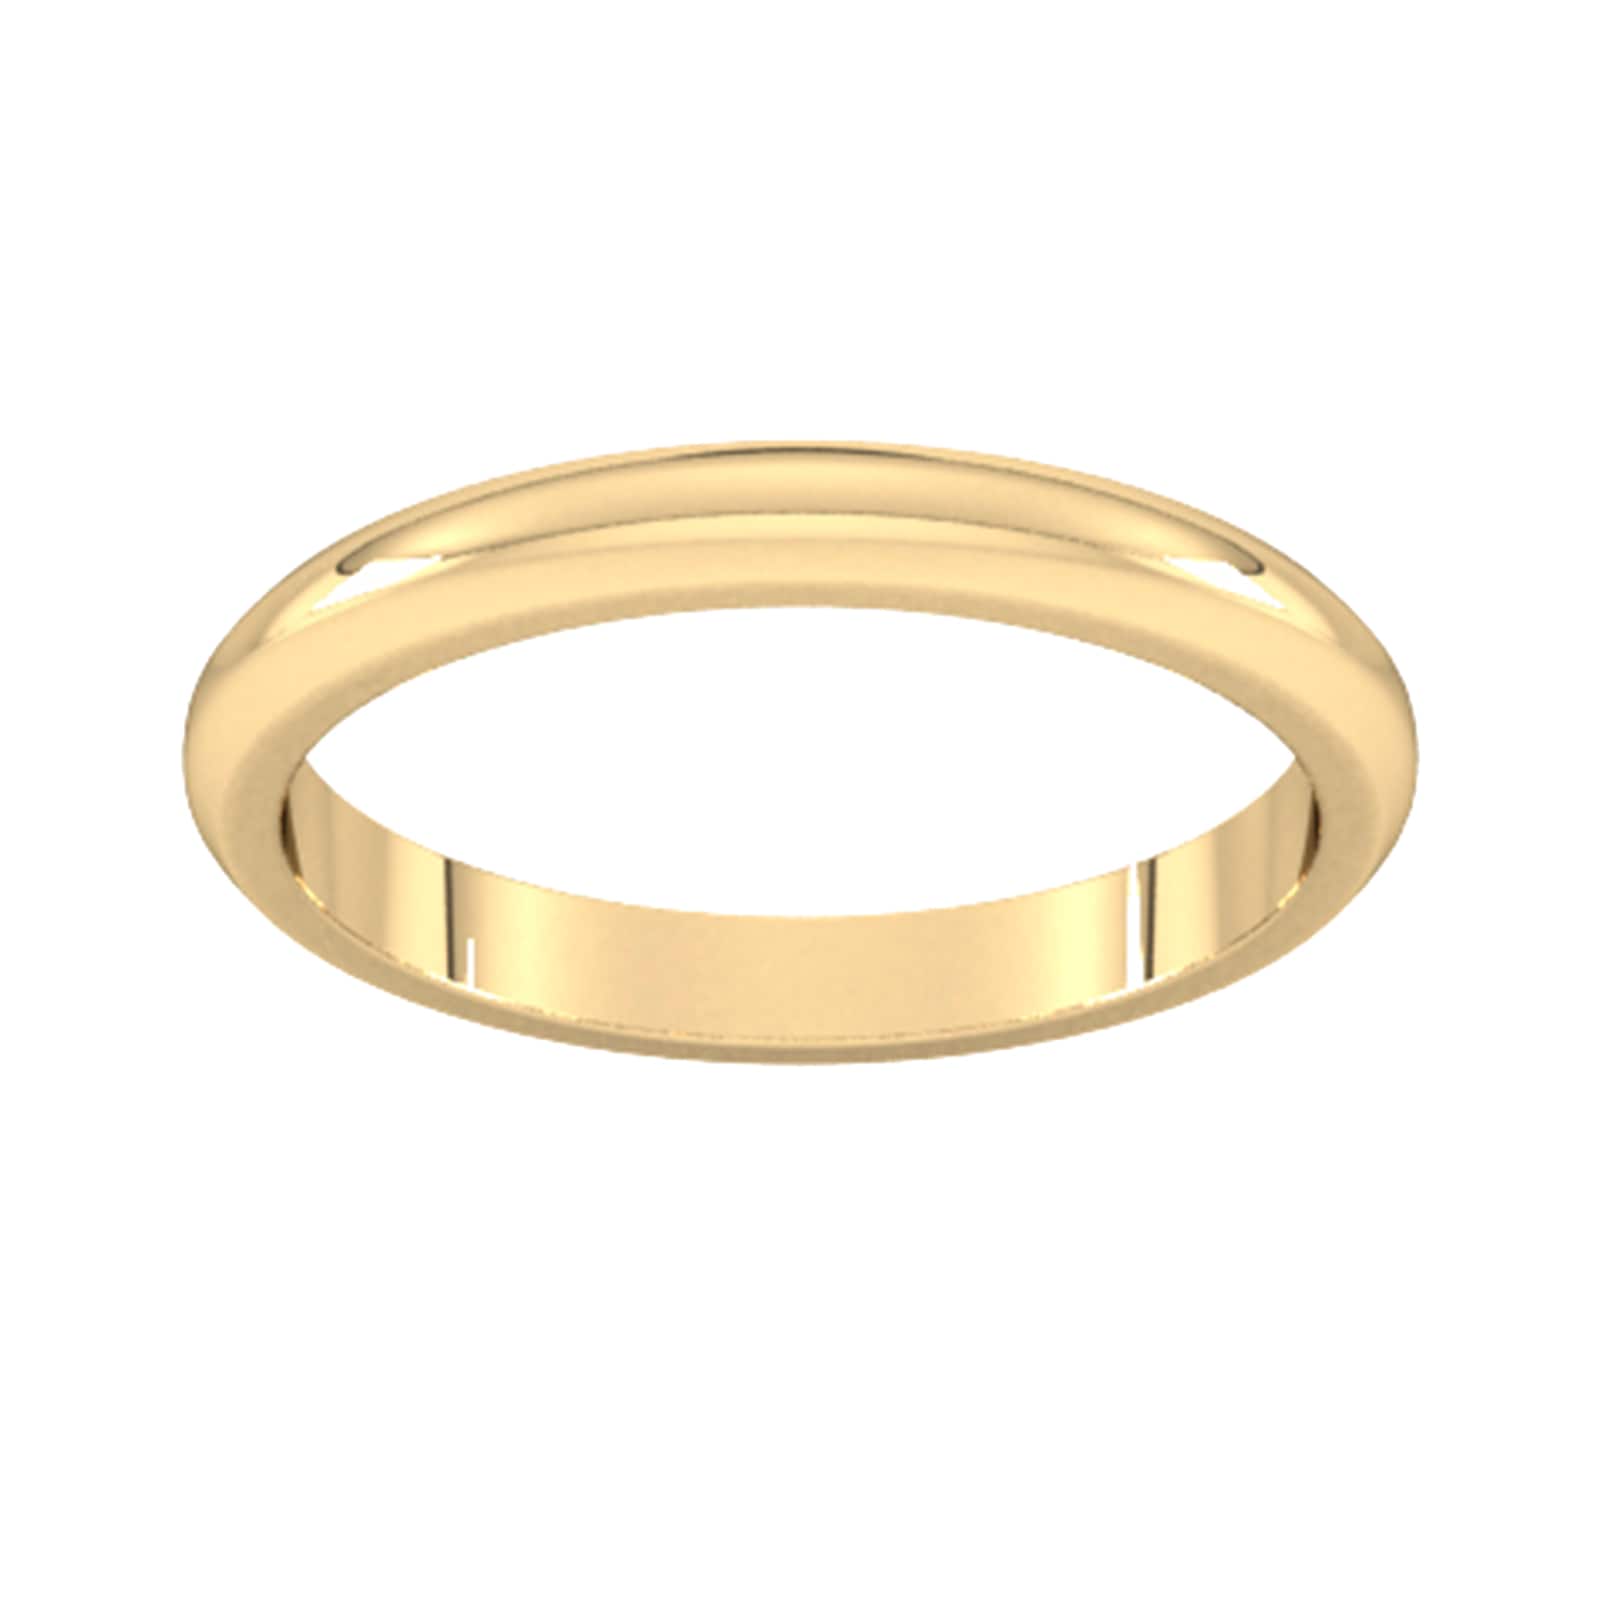 2.5mm D Shape Heavy Wedding Ring In 18 Carat Yellow Gold - Ring Size U